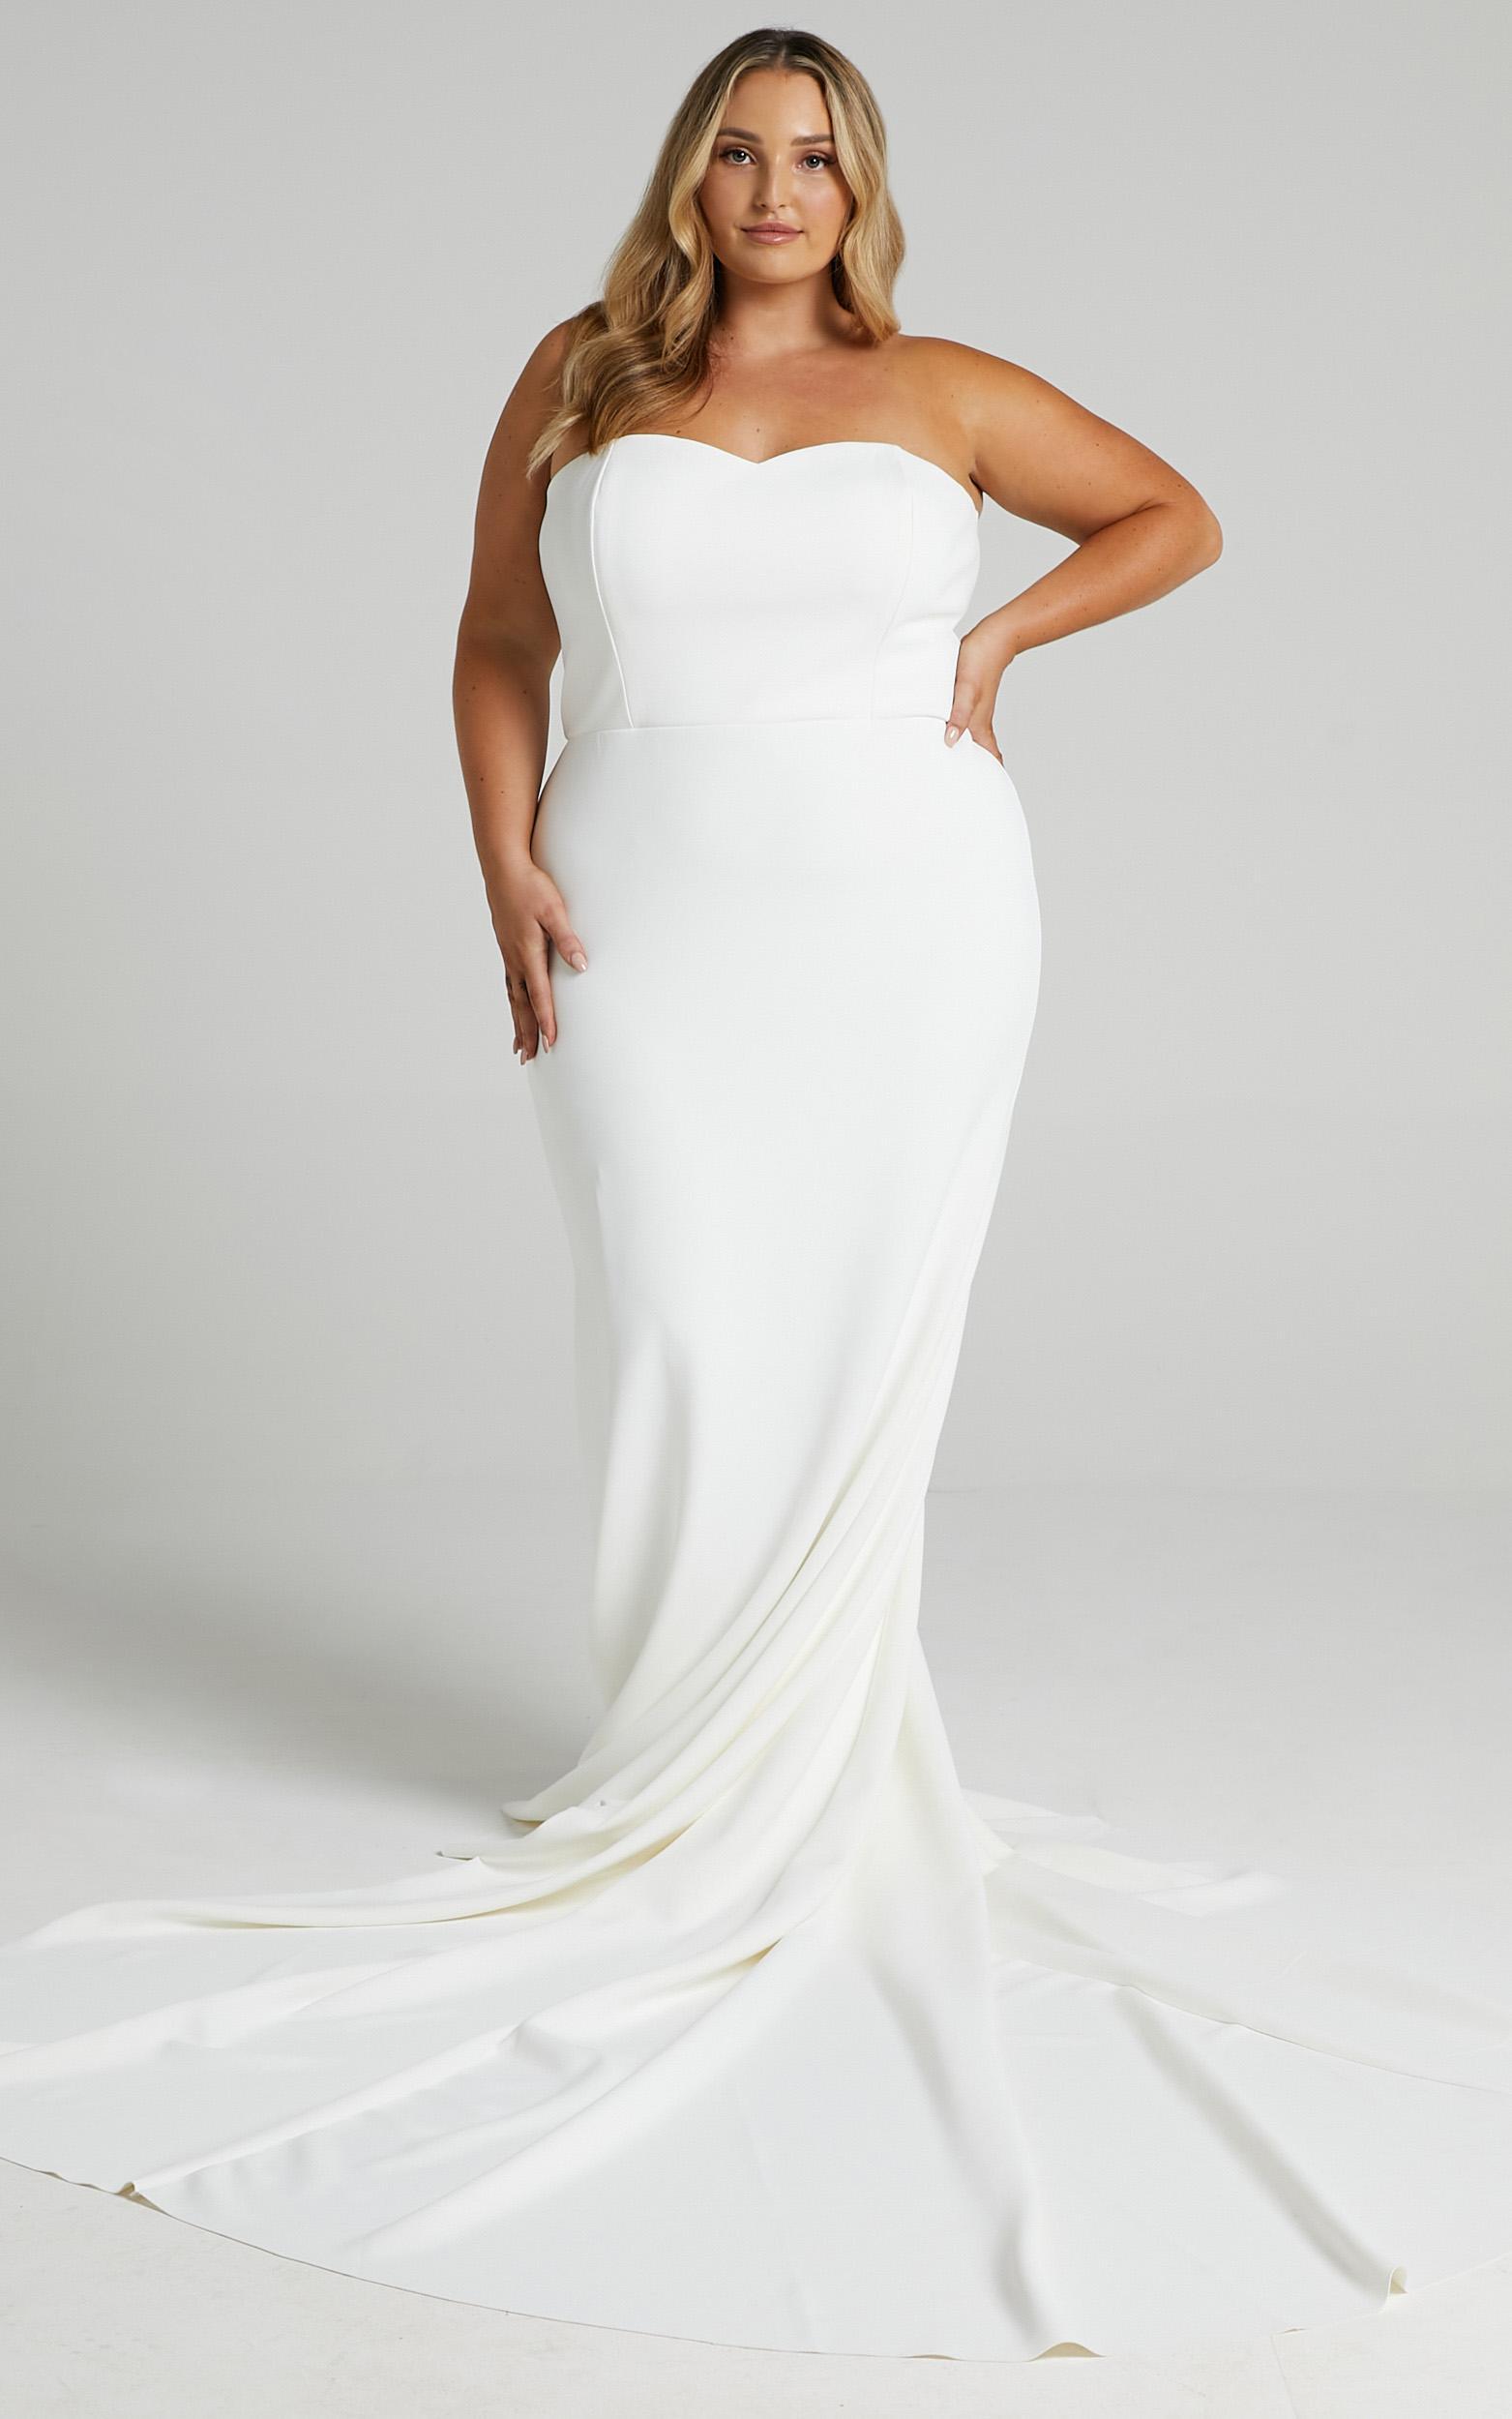 Vows For Life Gown in White - 20, WHT1, hi-res image number null